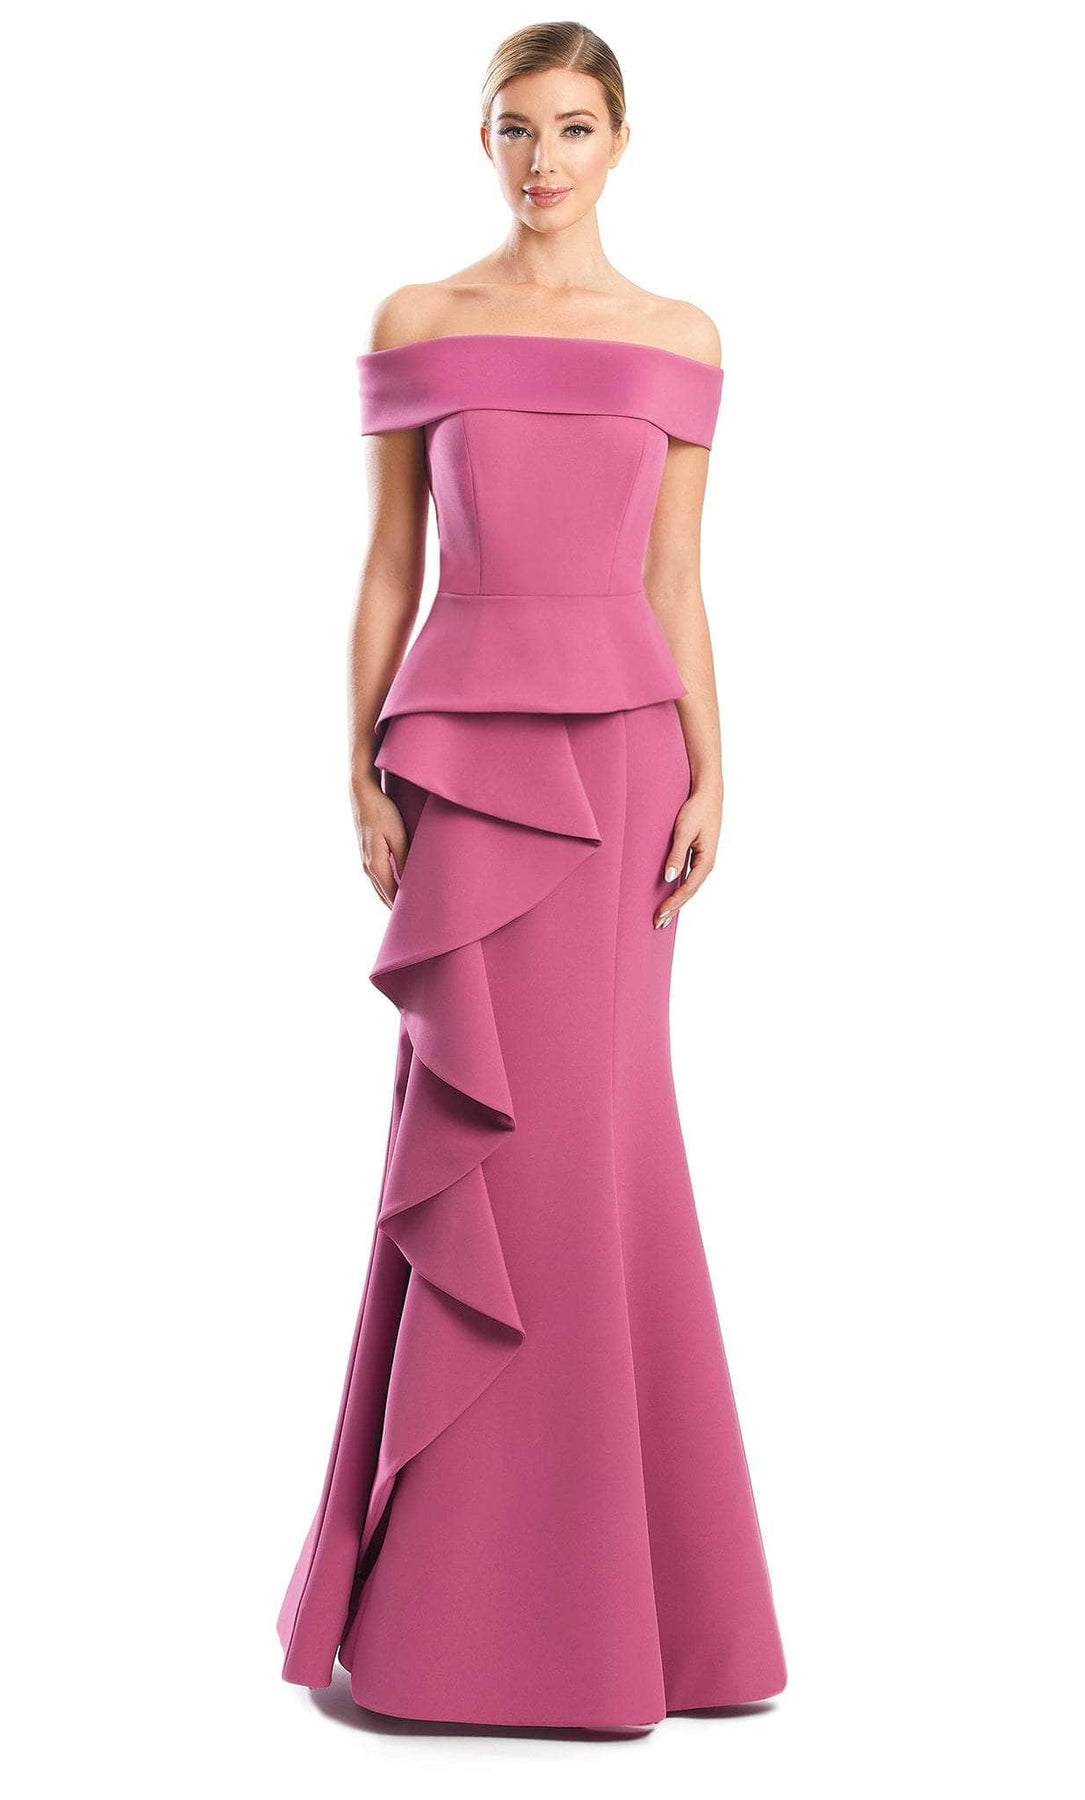 Alexander by Daymor 1756S23 - Minimalistic Off Shoulder Gown Evening Dresses 00 / Orchid